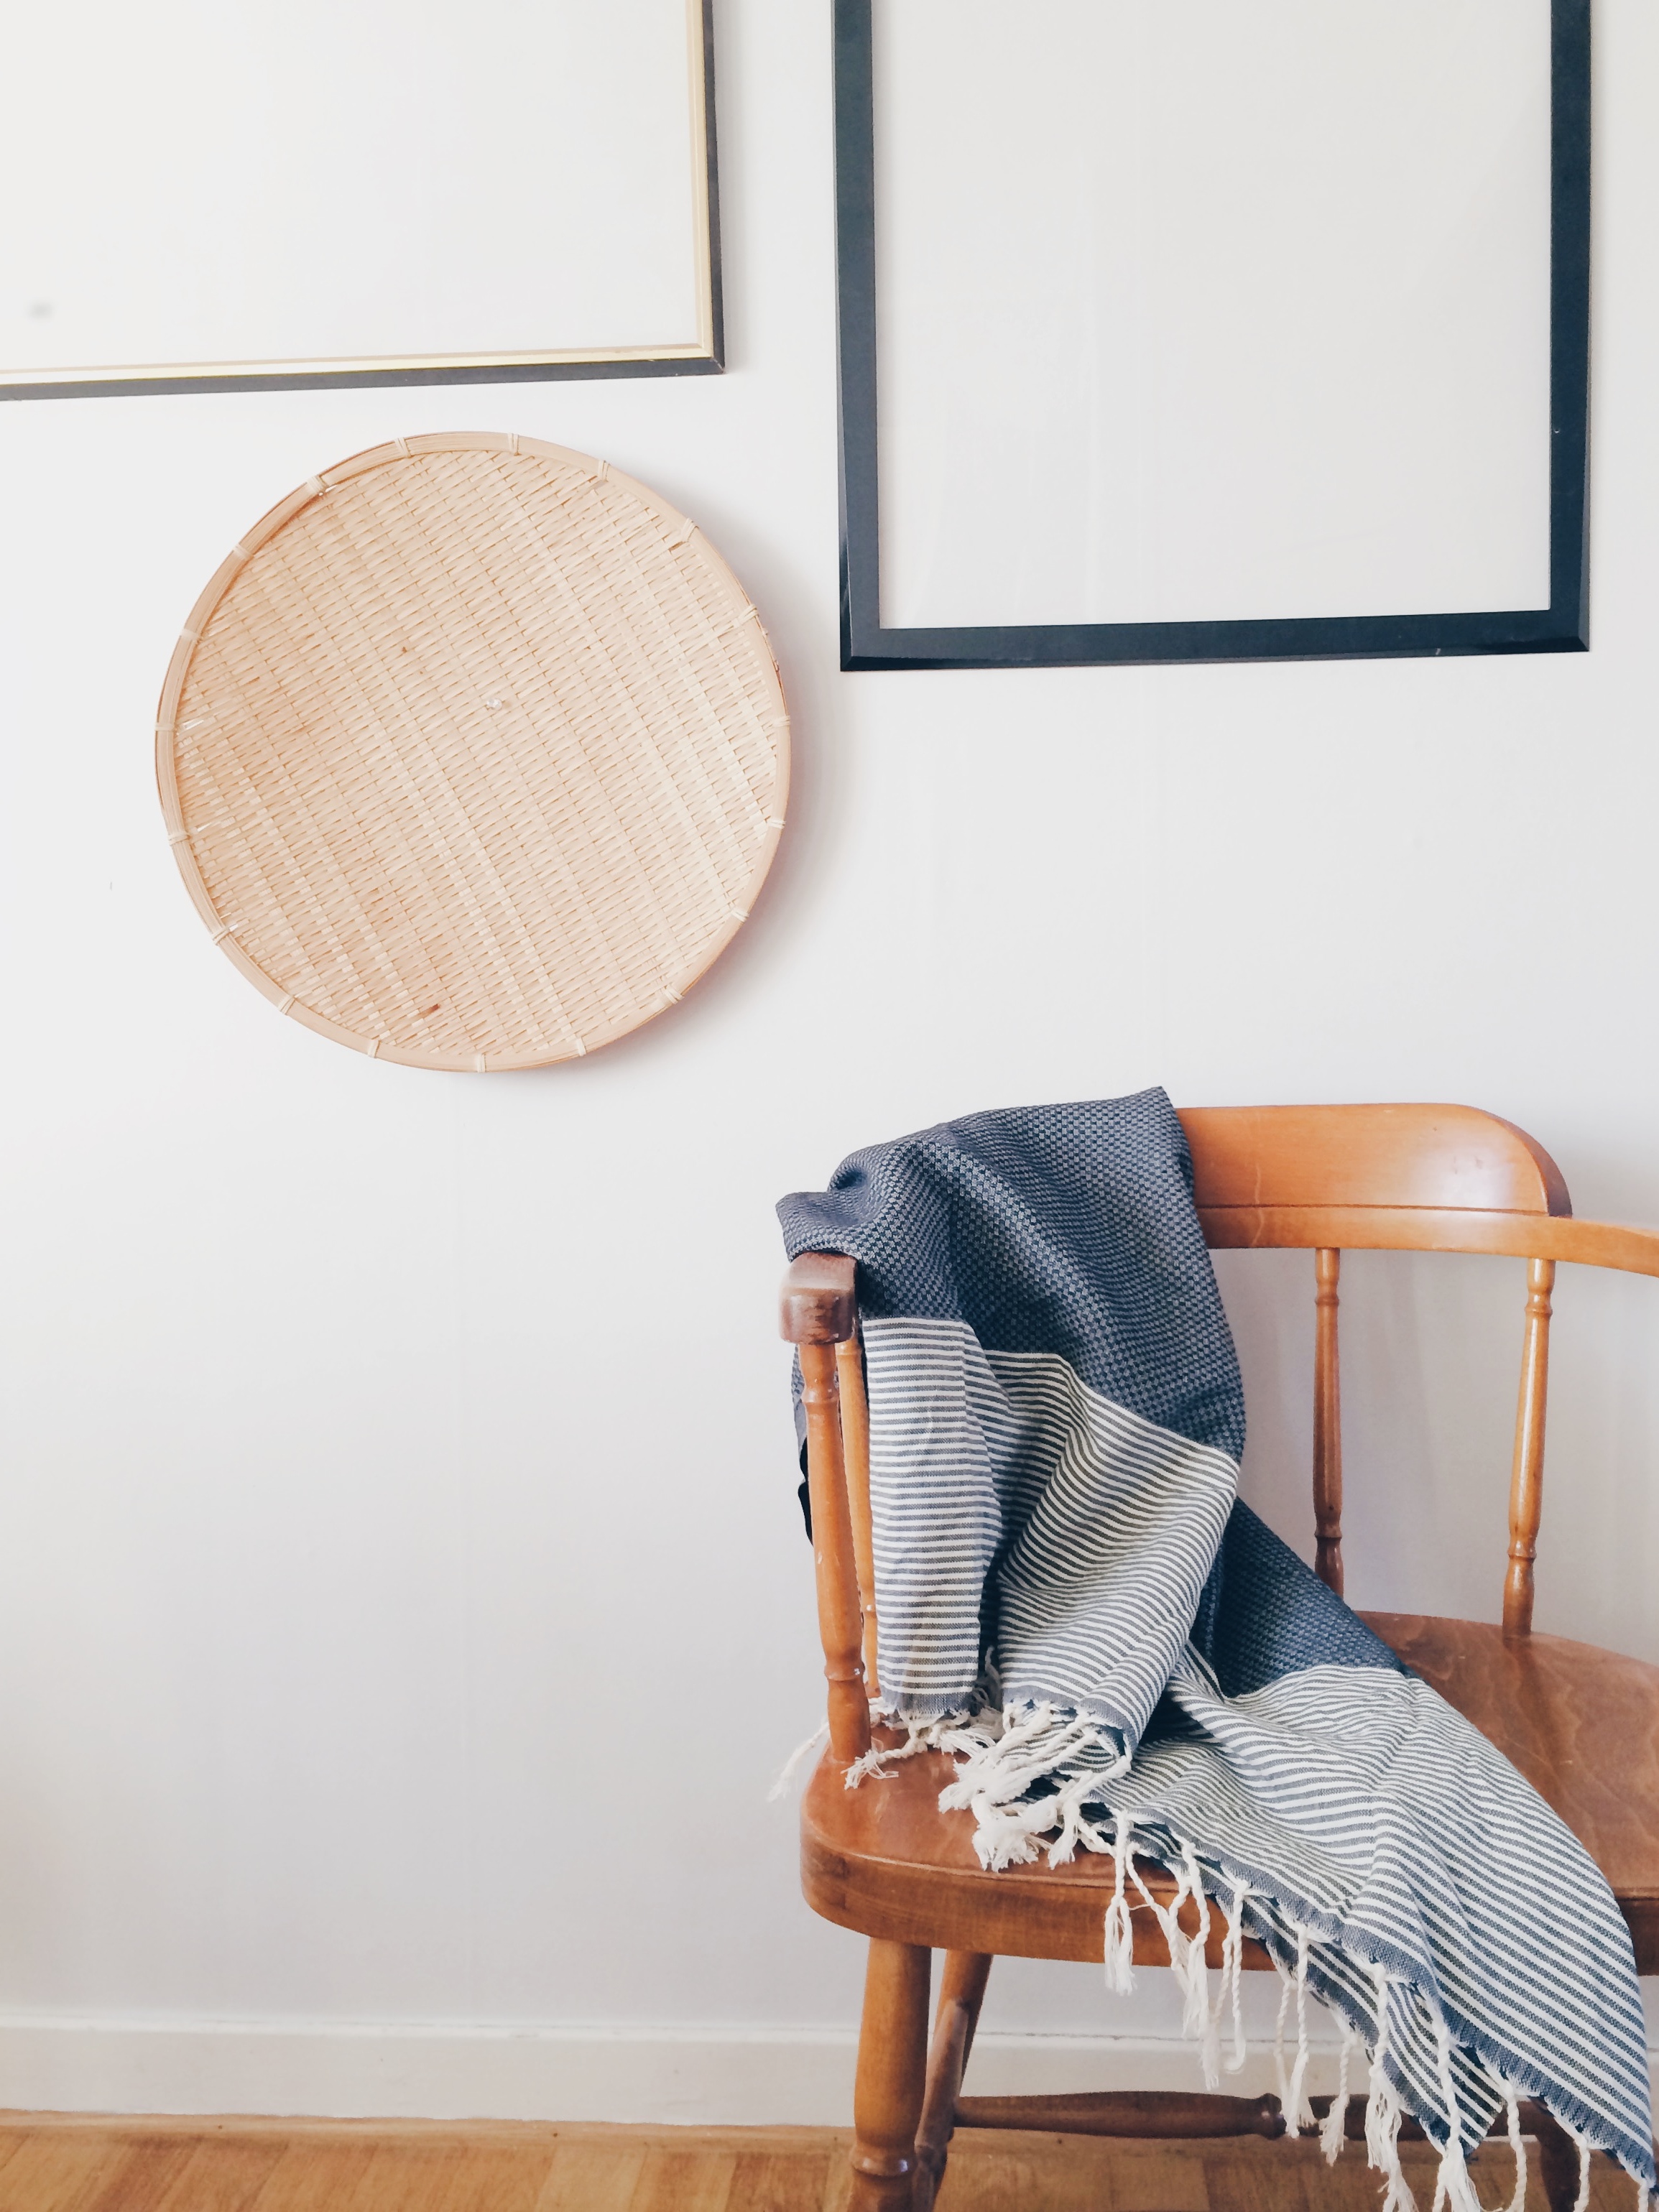 Perfection makes me yawn - homestyling